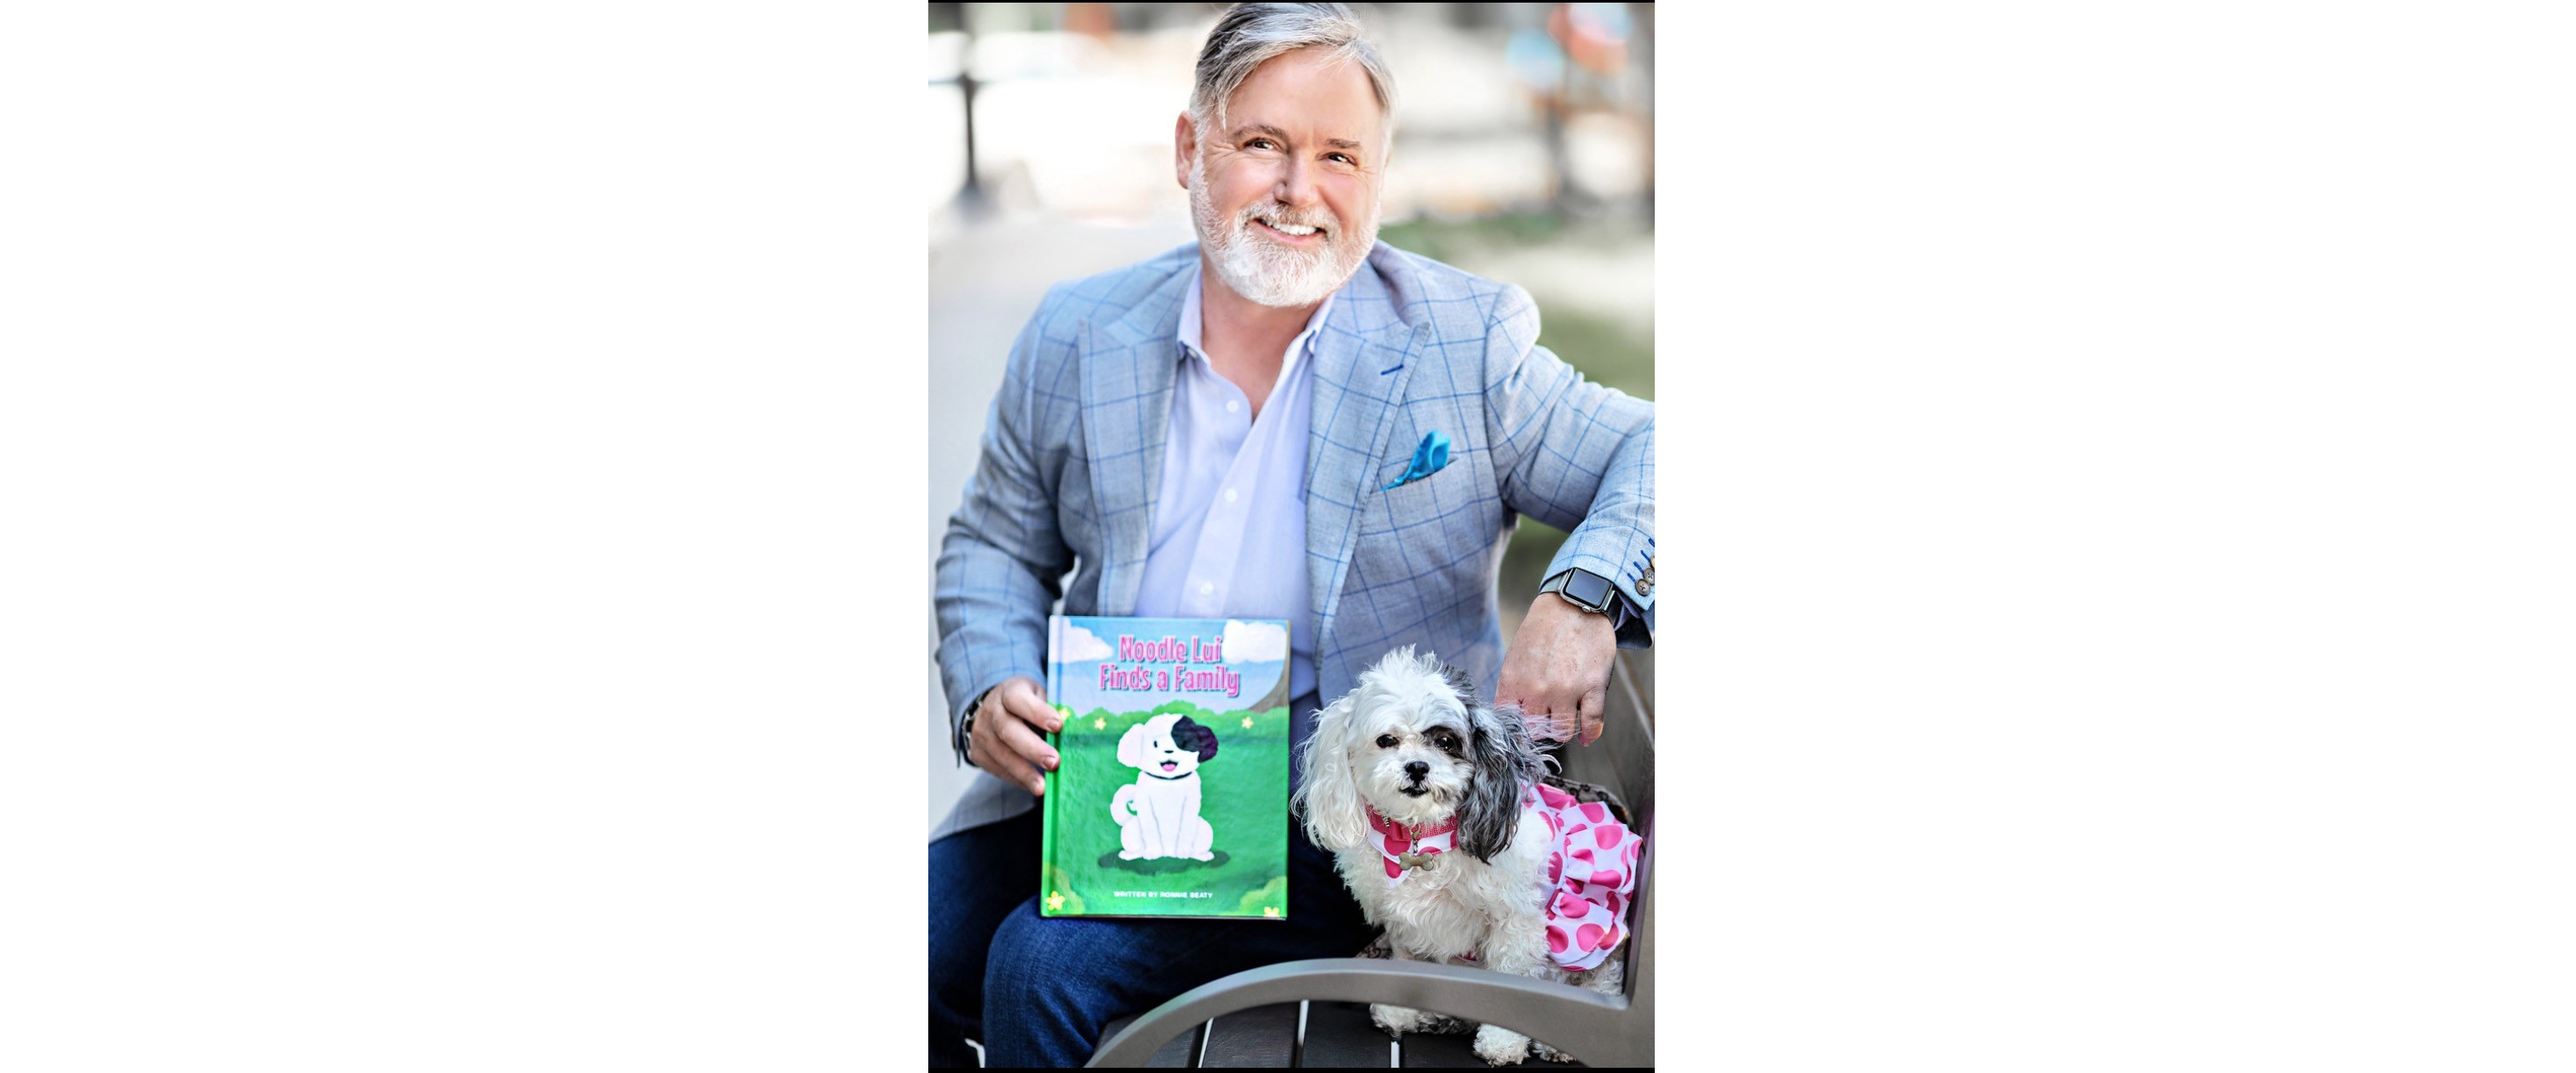 Author Ronnie Beatty and dog Noodle Lui pose with book